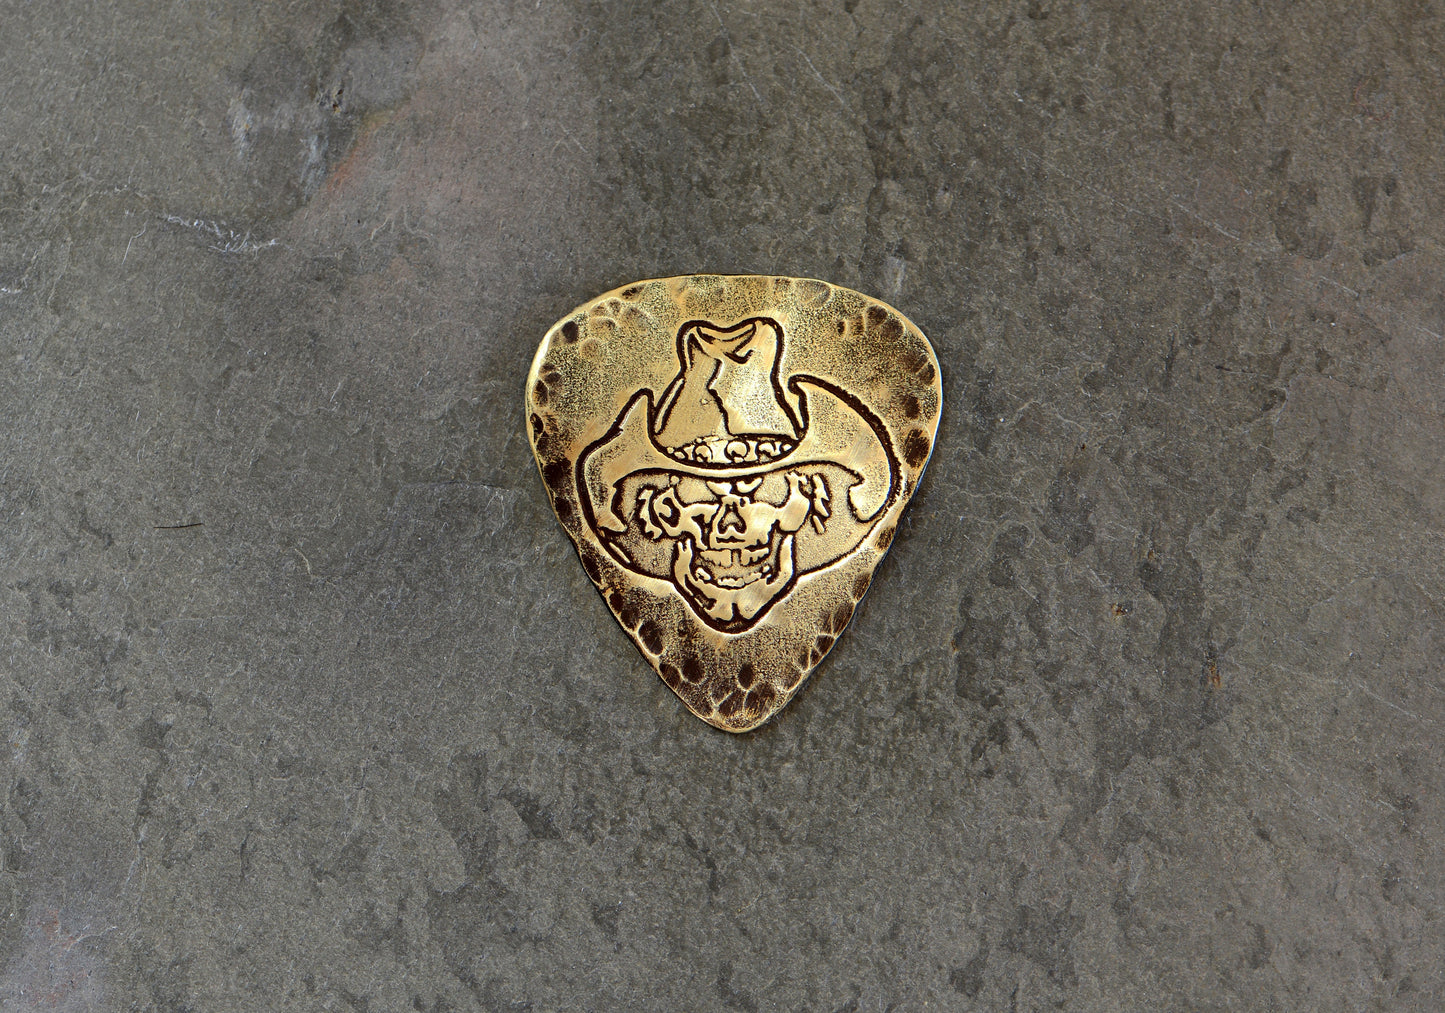 Brass guitar pick rocking a skull with cowboy hat